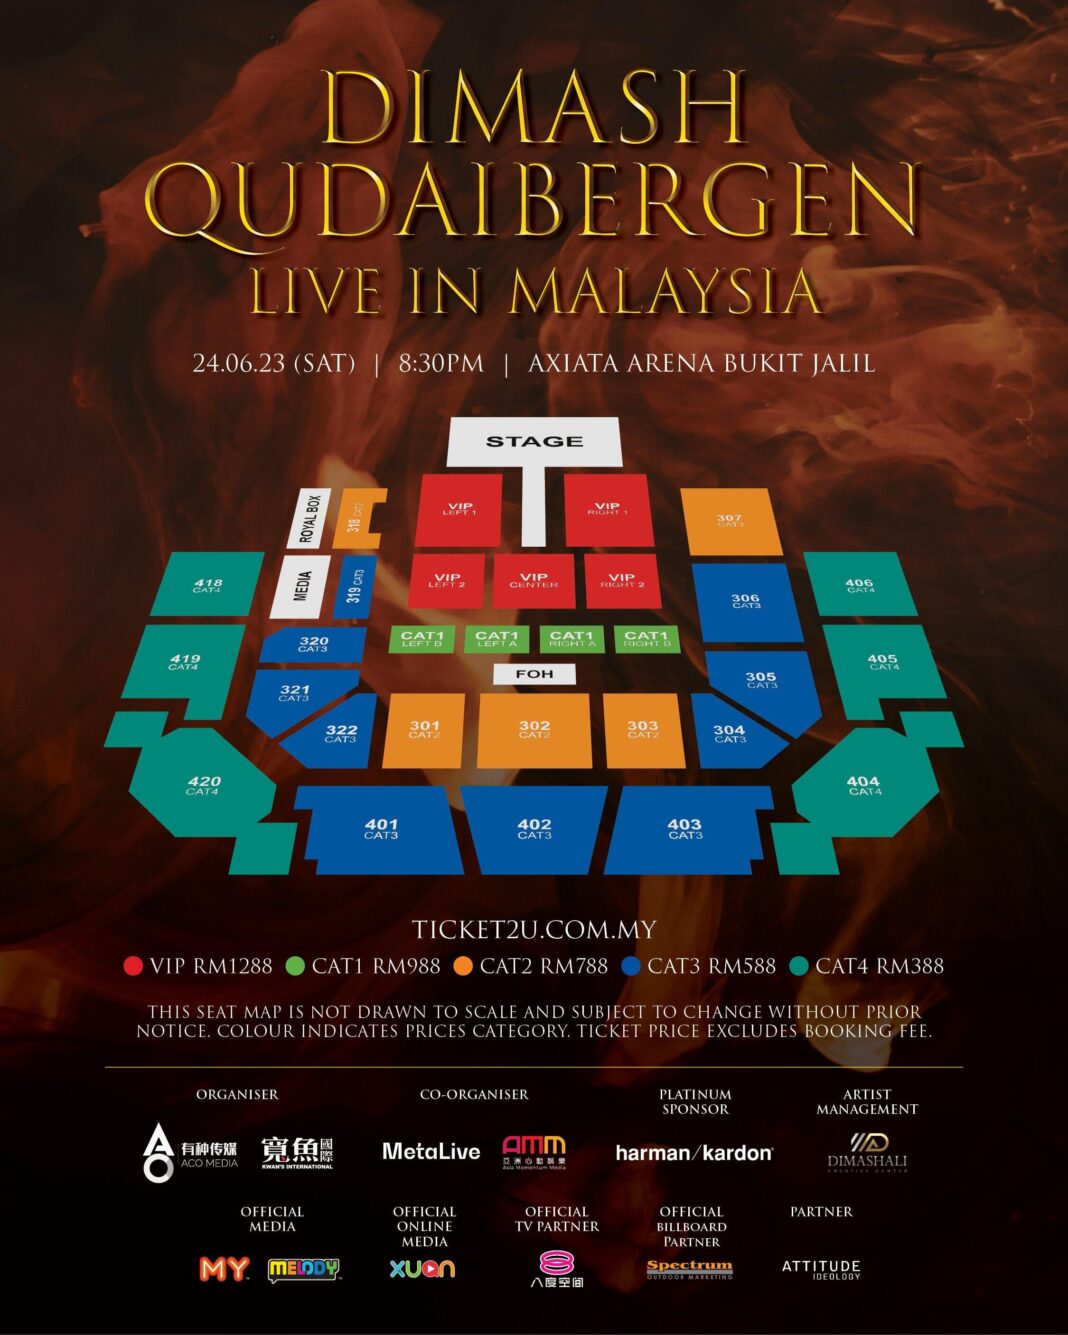 Dimash Qudaibergen will give a solo concert in Malaysia